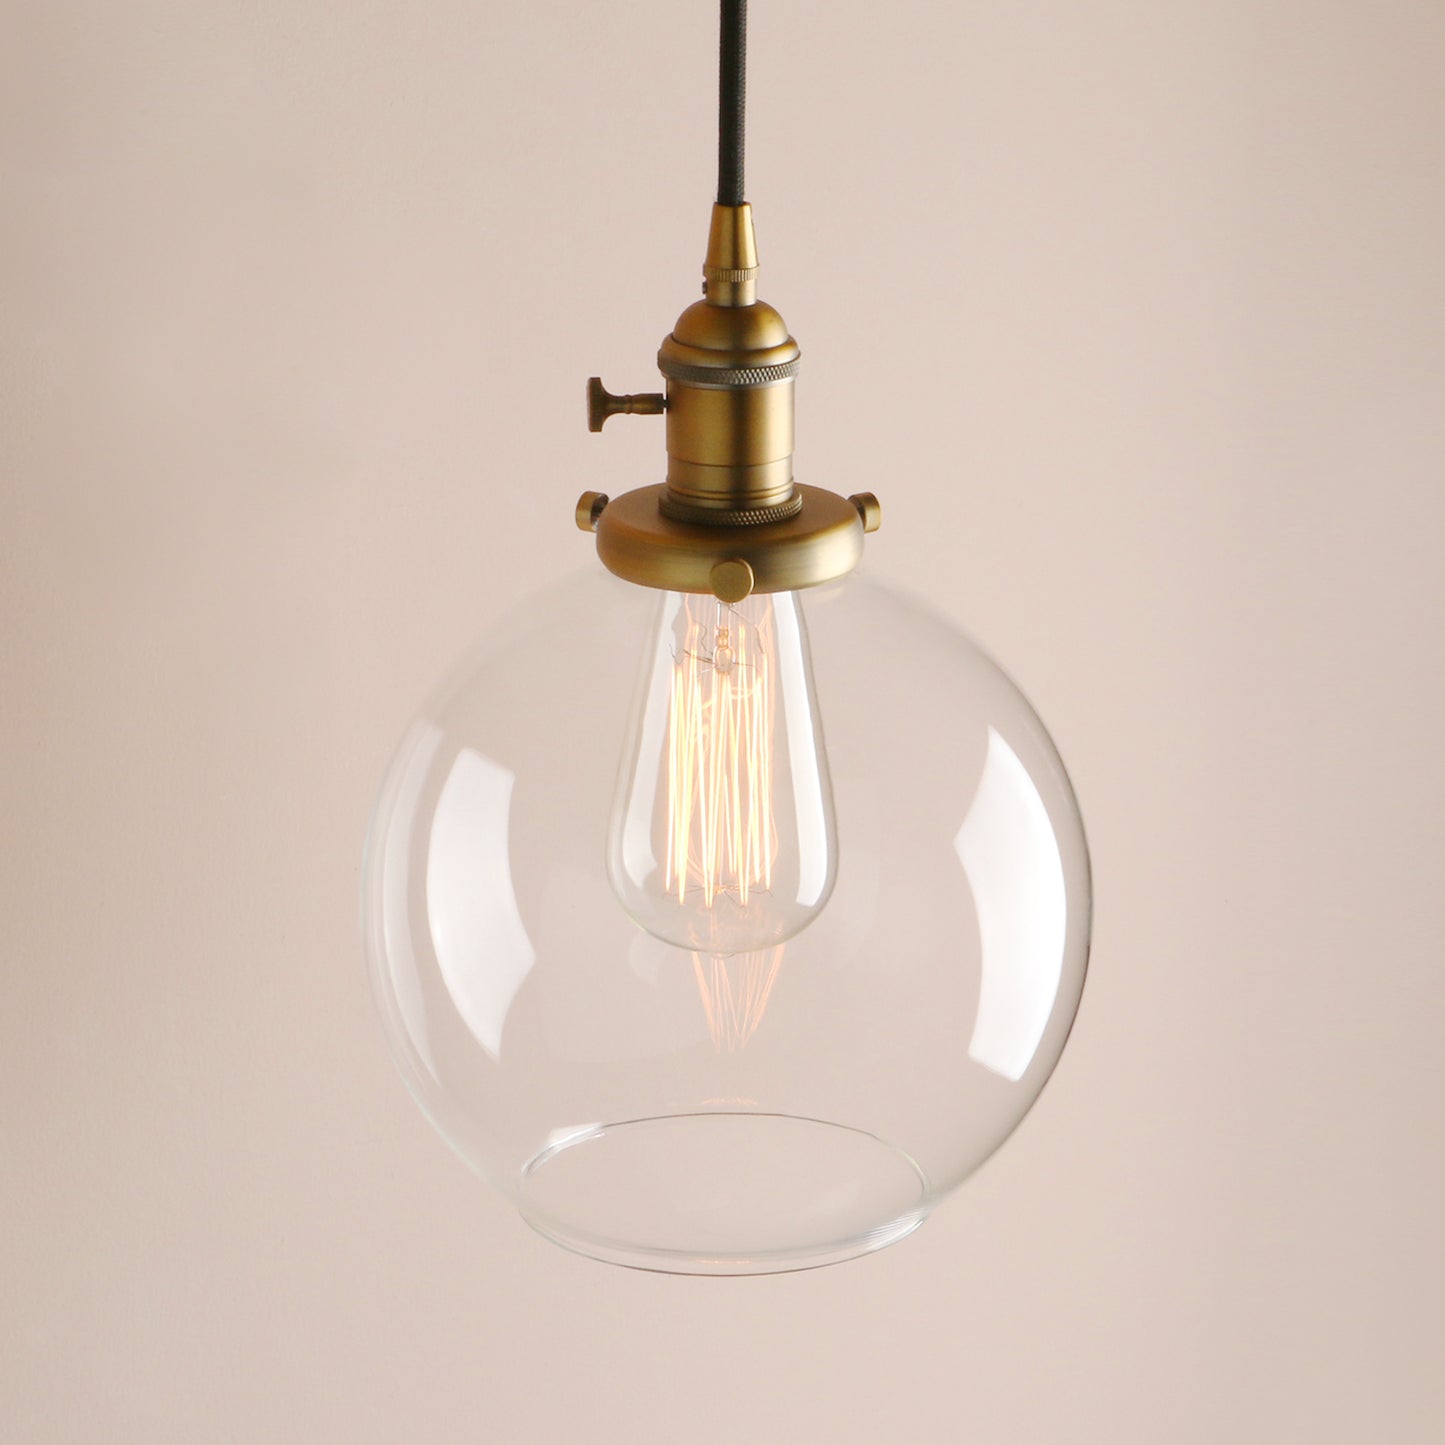 Globe Round Glass Shade Industrial Style Retro Hanging Lamps